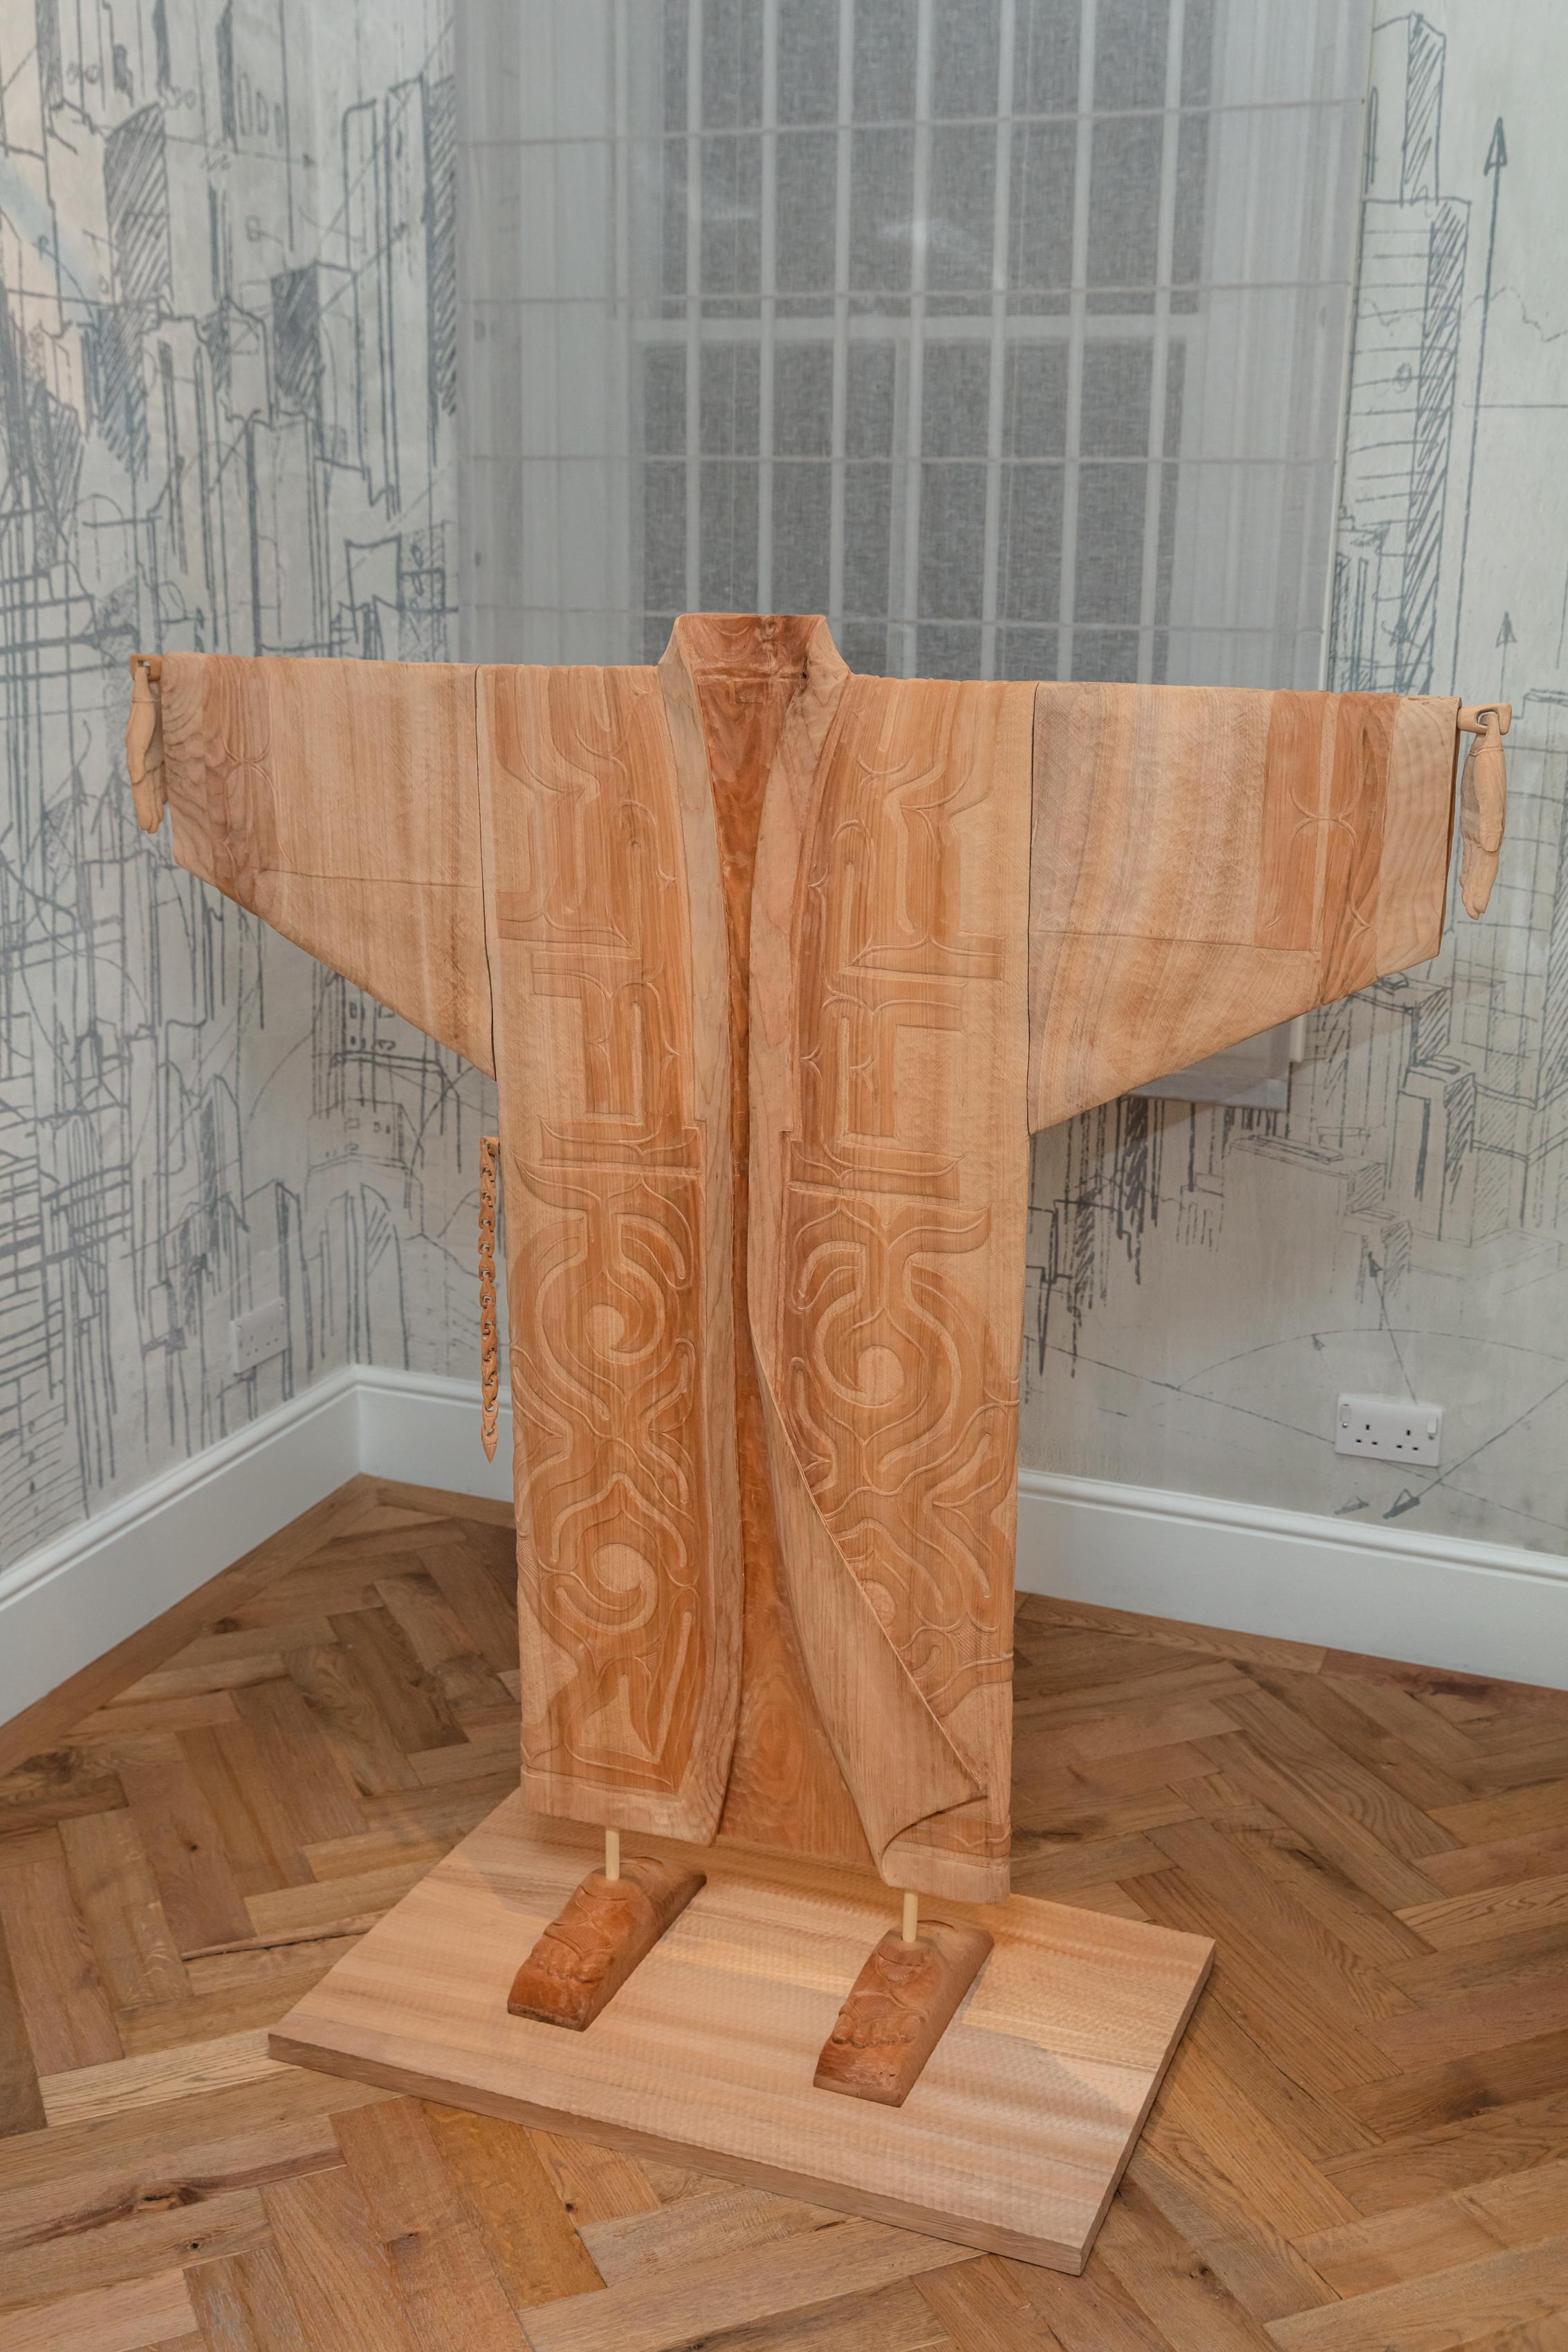 This hand-carved wooden kimono sculpture is a contemporary piece of art made by award-winning artist Toru Kaizawa. Entitled “Hagi”, this piece was created in collaboration with SoShiro gallery for the Ainu collection. It celebrates the artistry of